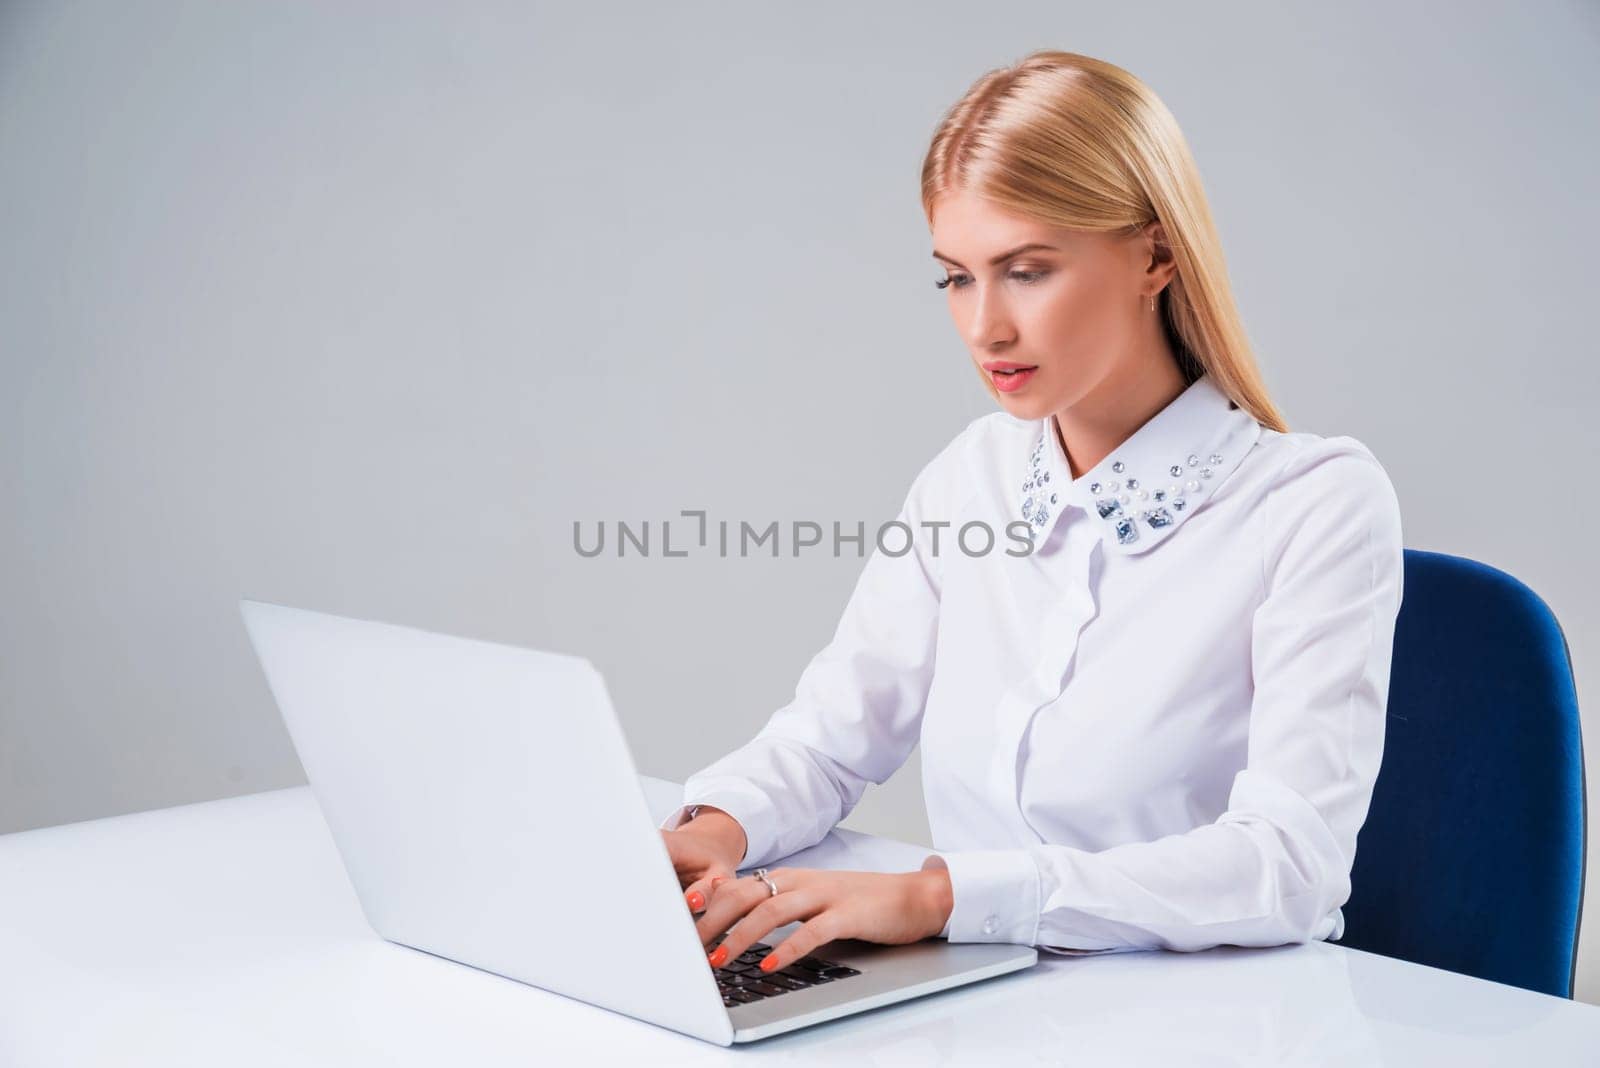 Young businesswoman working at laptop computer. she sits smiling